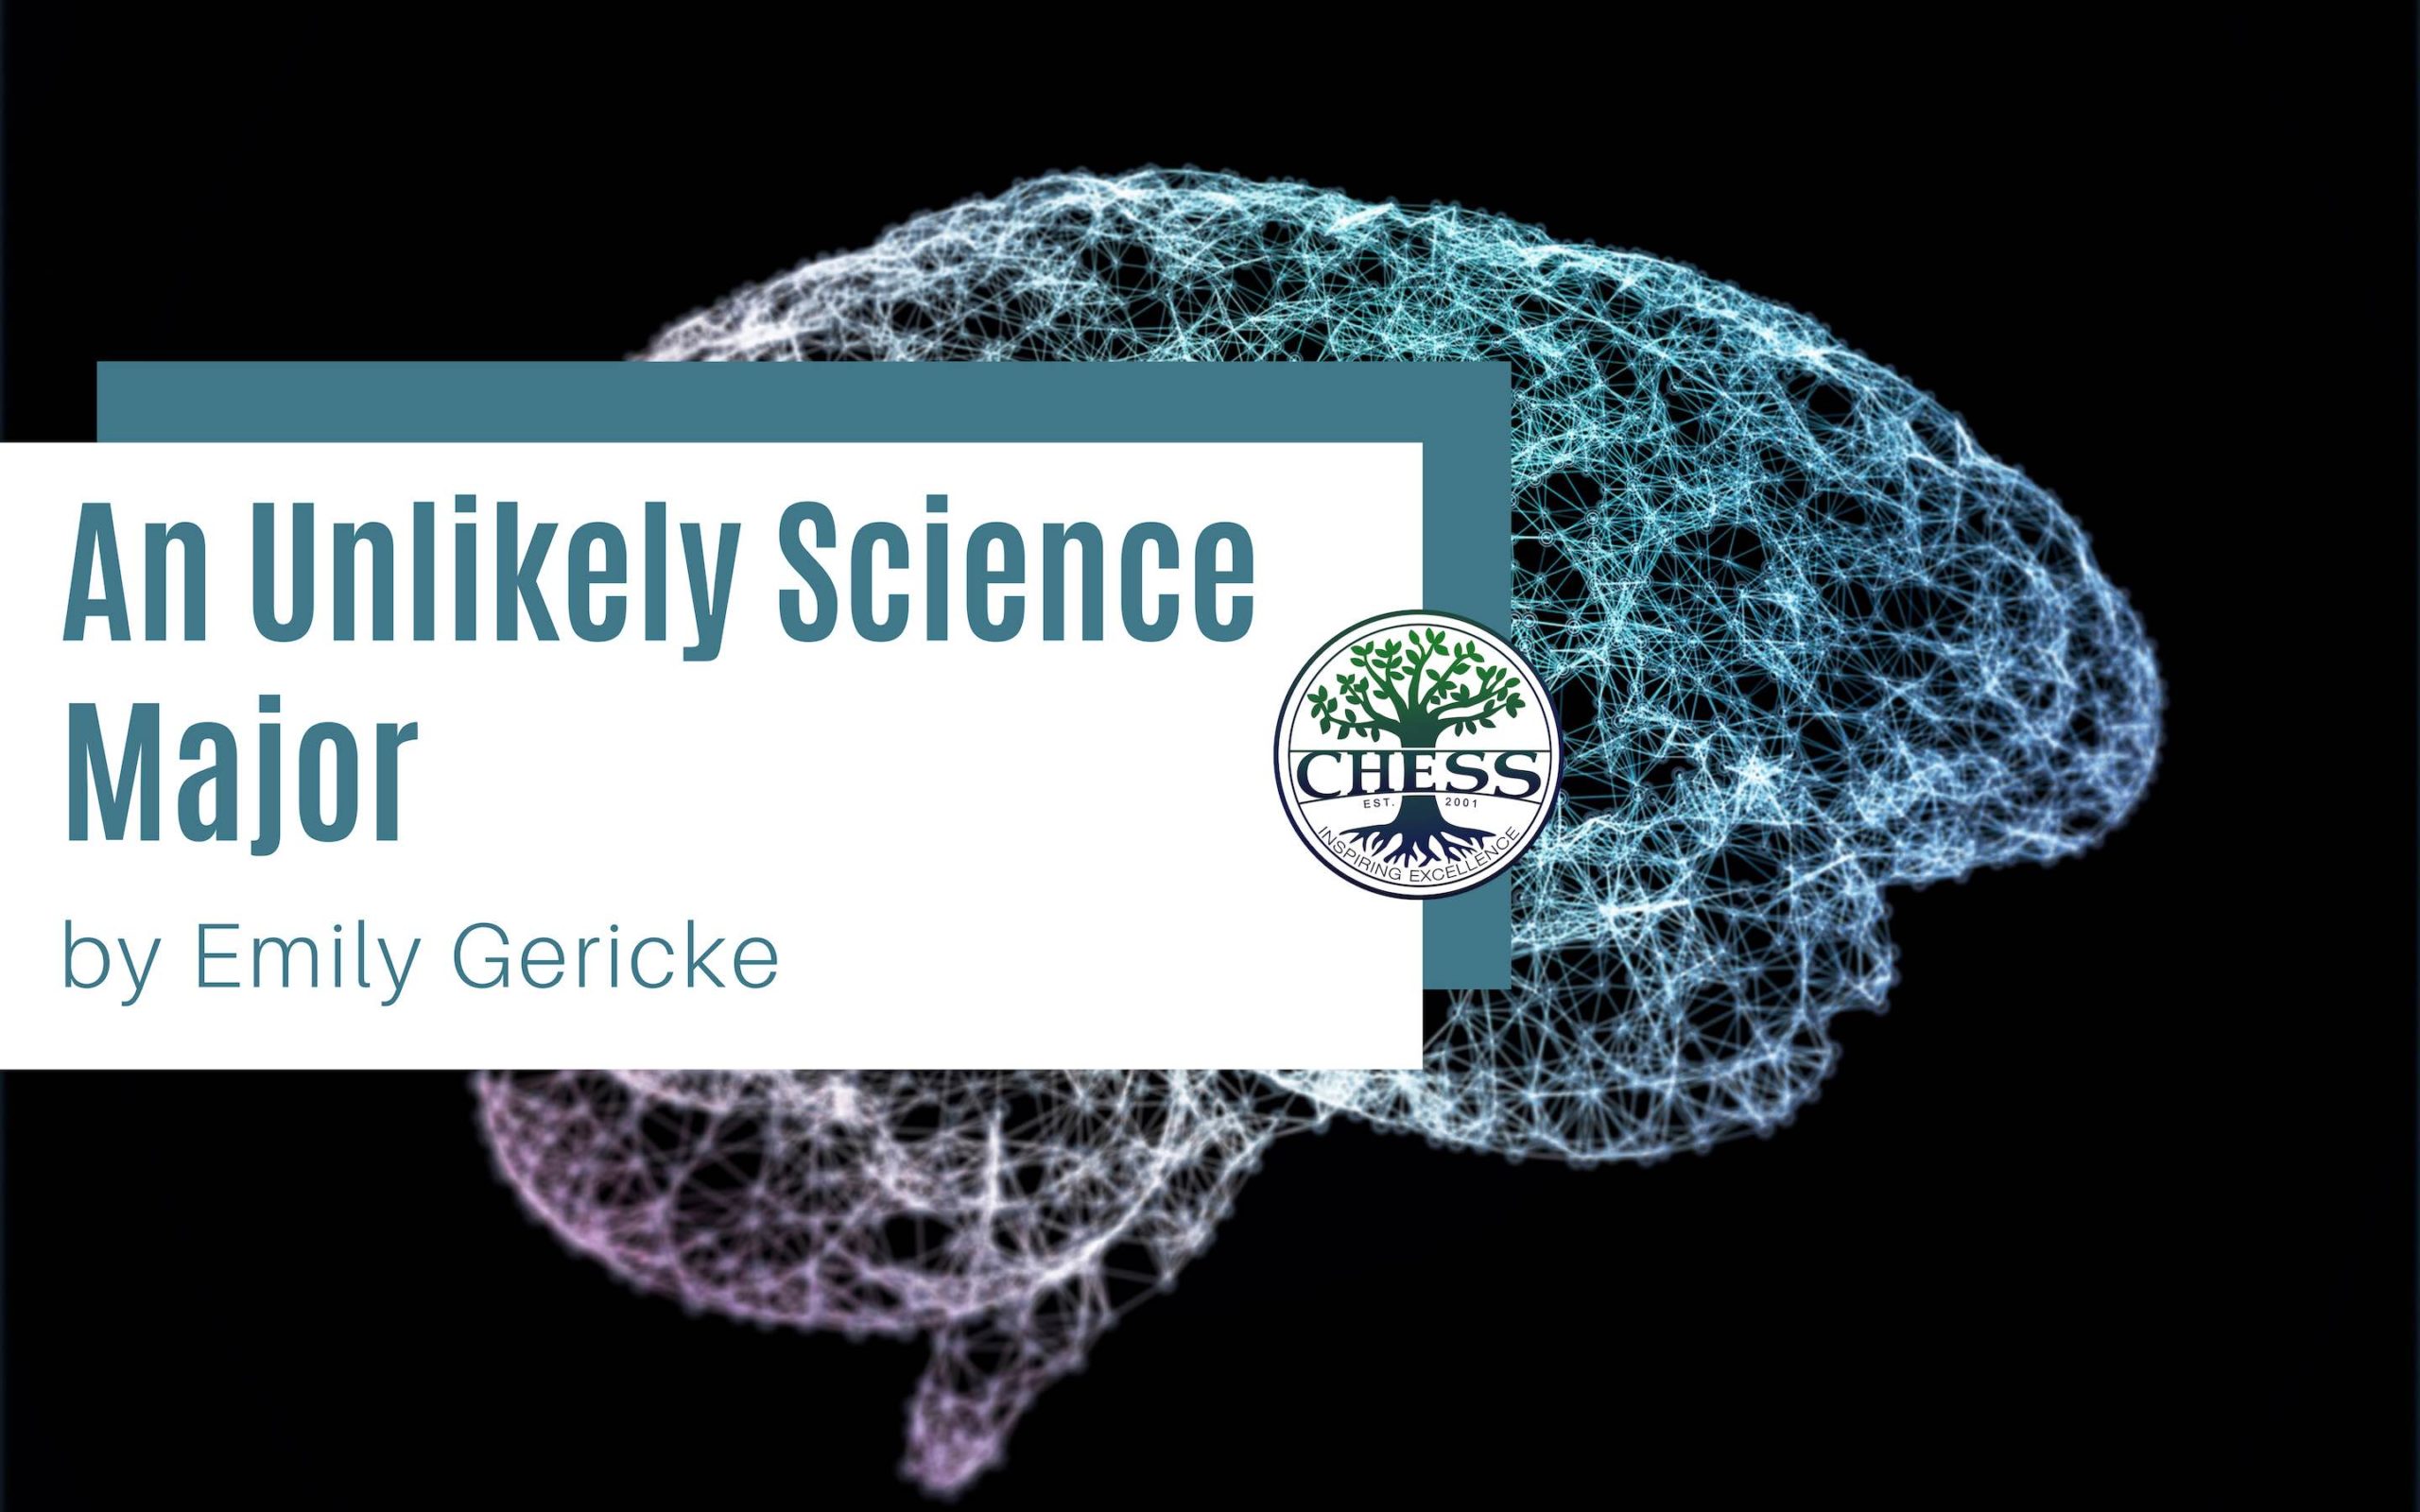 An Unlikely Science Major – by Emily Gericke (CHESS Symposium Speaker)